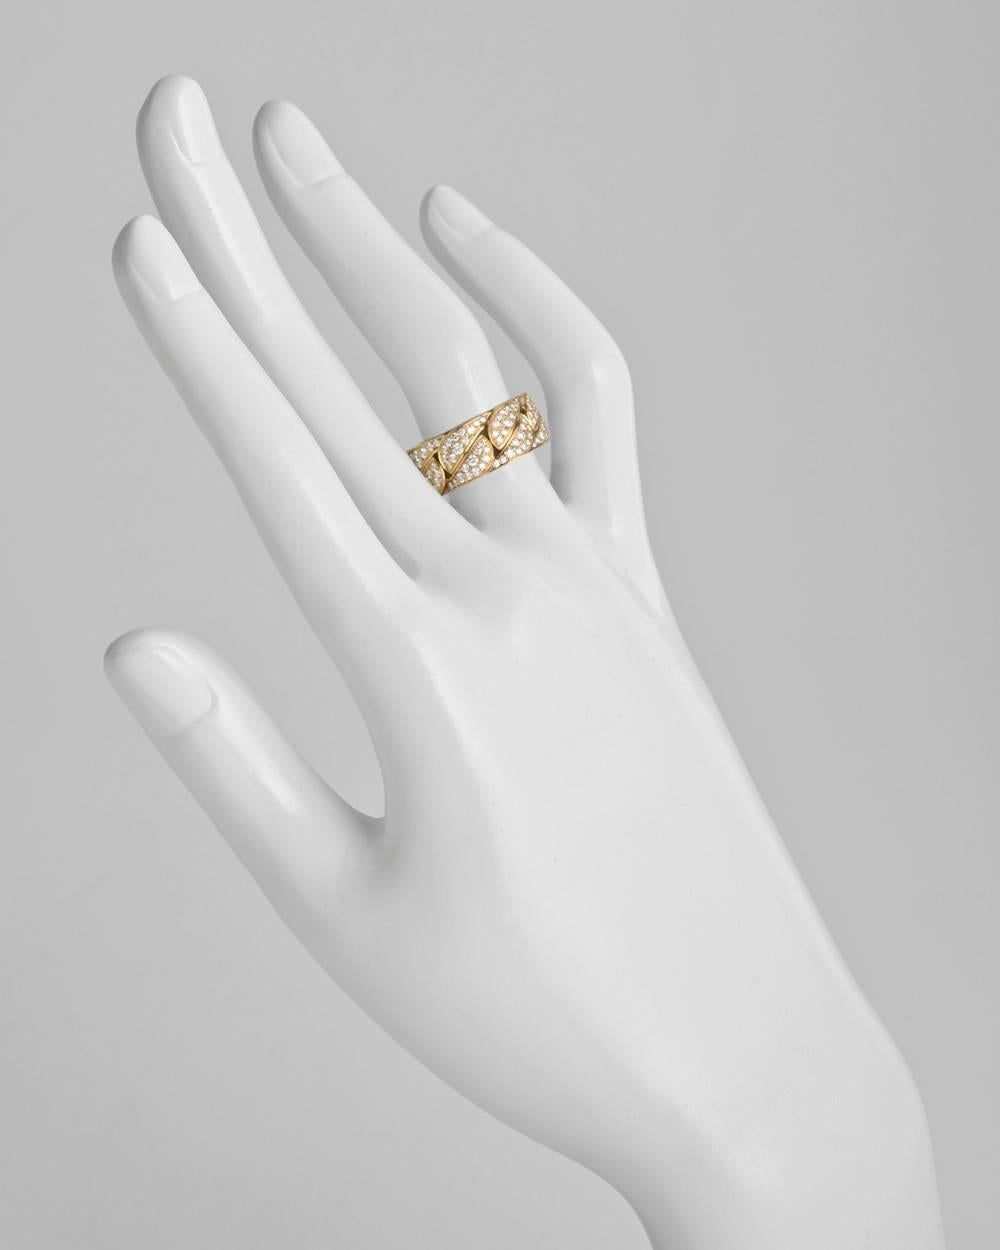 "La Dona" band ring, showcasing pavé-set diamond geometric links, in 18k yellow gold, numbered NW1751, signed Cartier. 8mm band width. Size 5.75 (European - 51).
